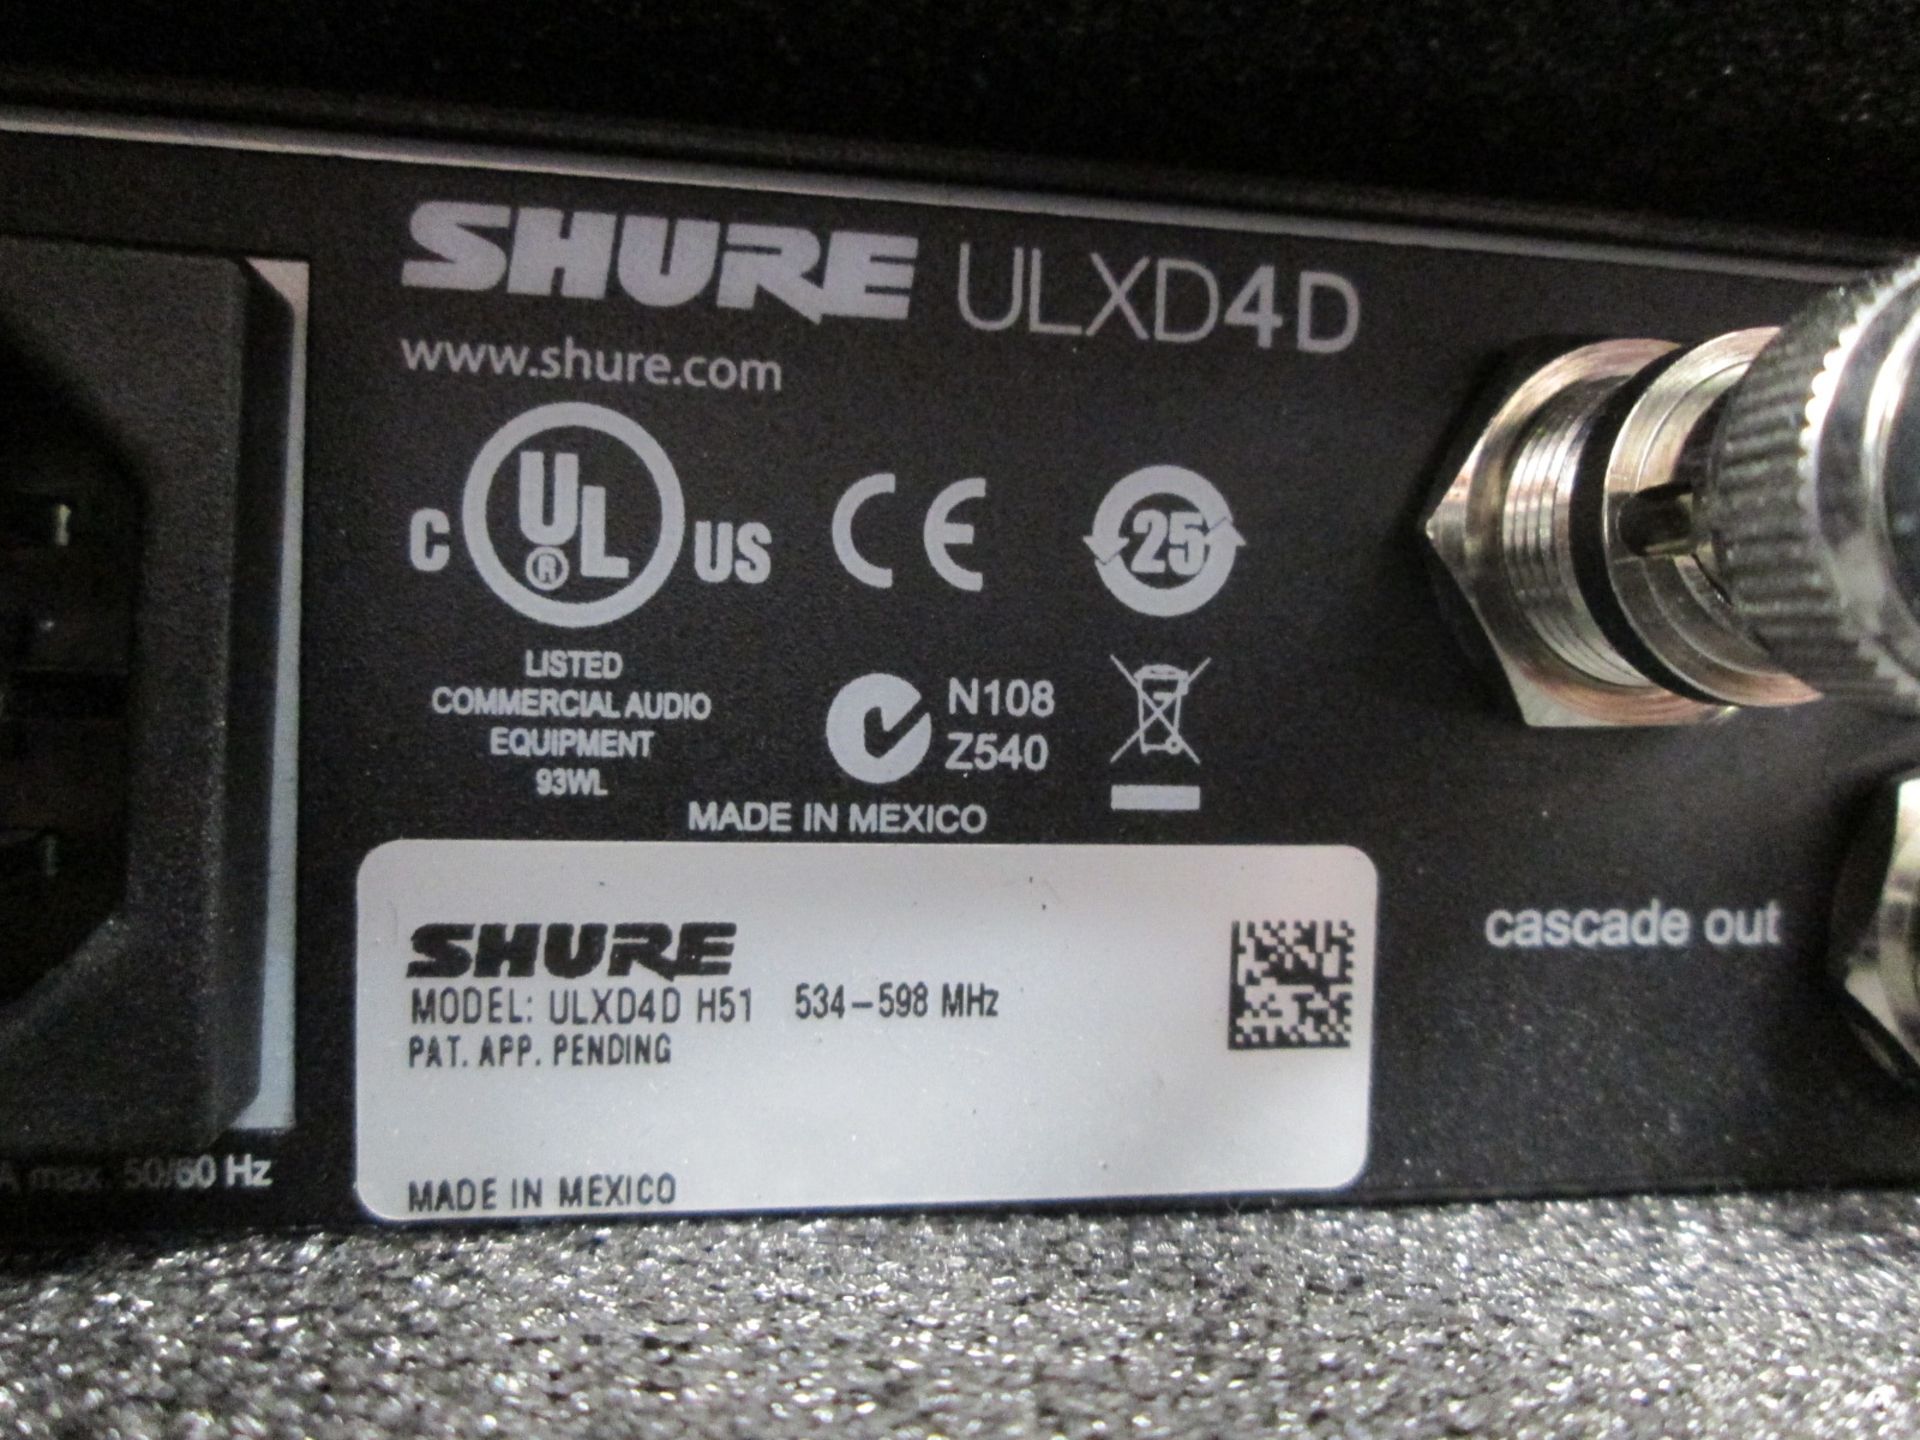 Shure ULXD4D Radio System in Handbag (Qty 2) To include 1 x ULXD4D digital wireless receiver (H51 - Image 5 of 11